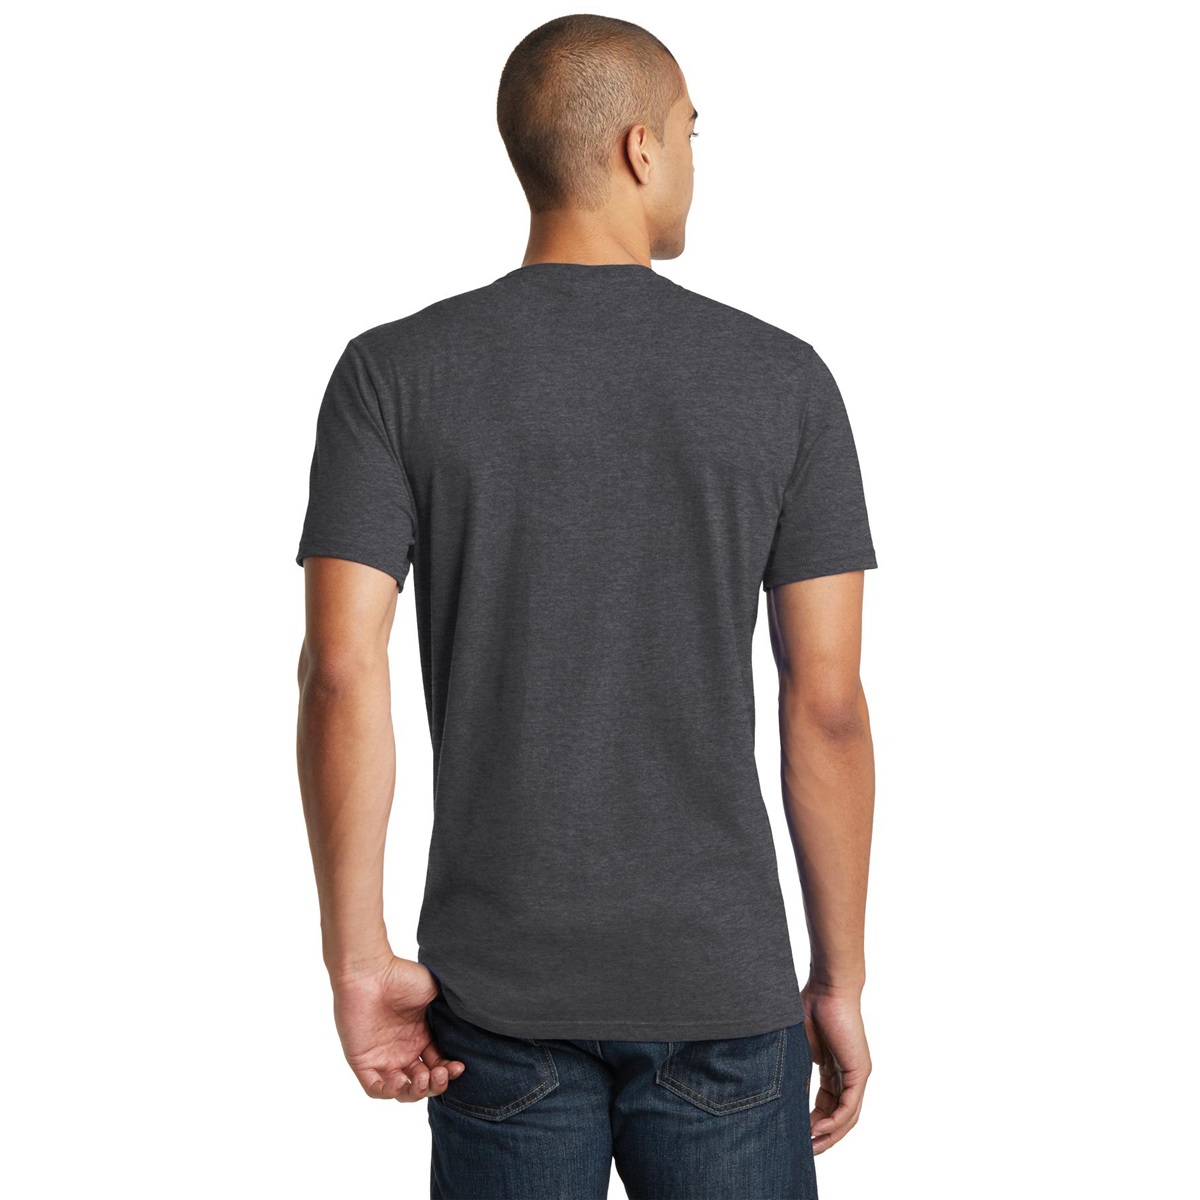 District DT5000 The Concert Tee - Heathered Charcoal | Full Source